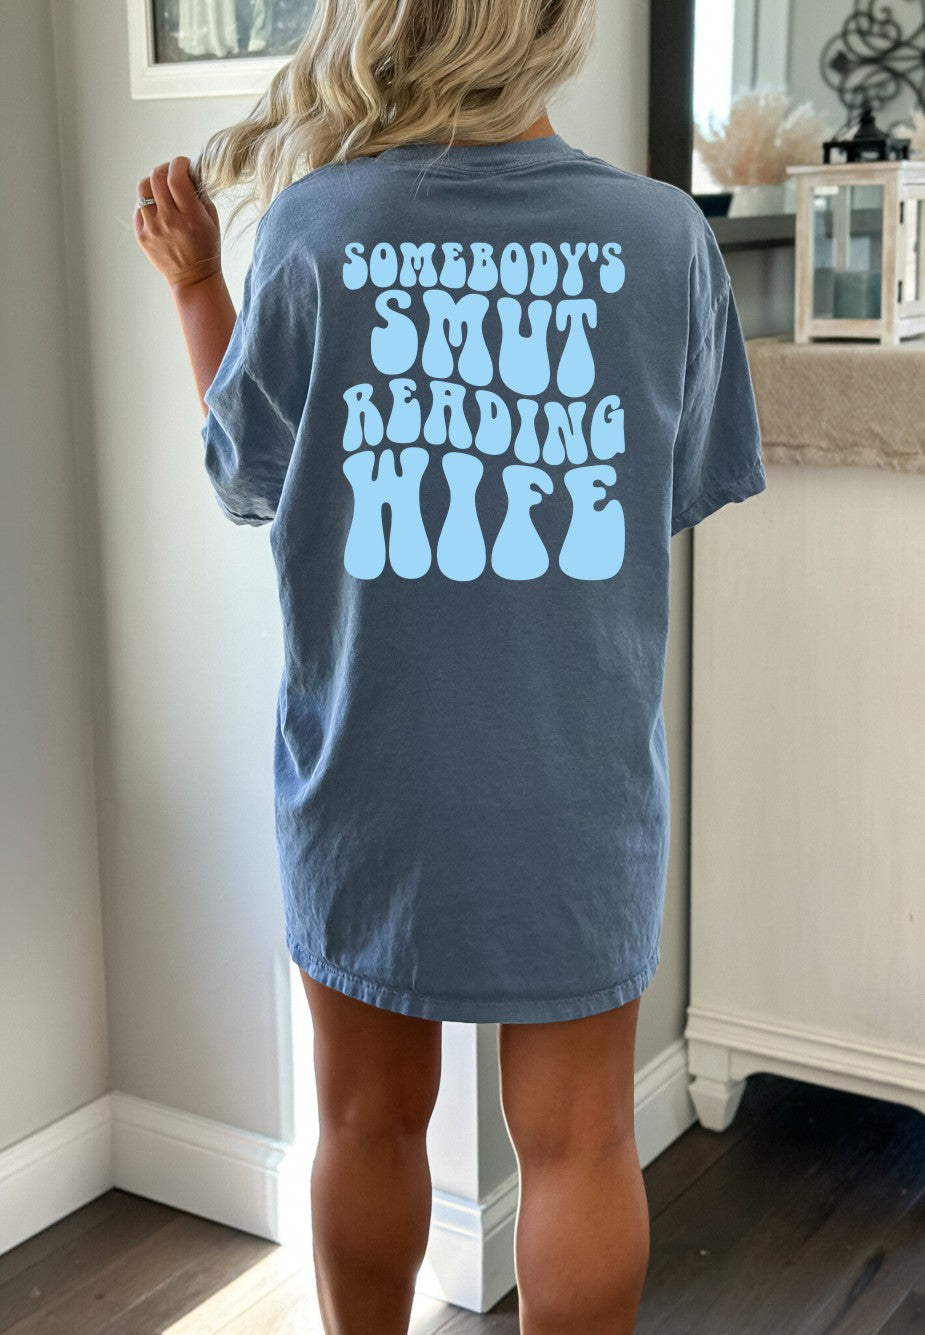 Somebody's Smut Reading Wife Shirt